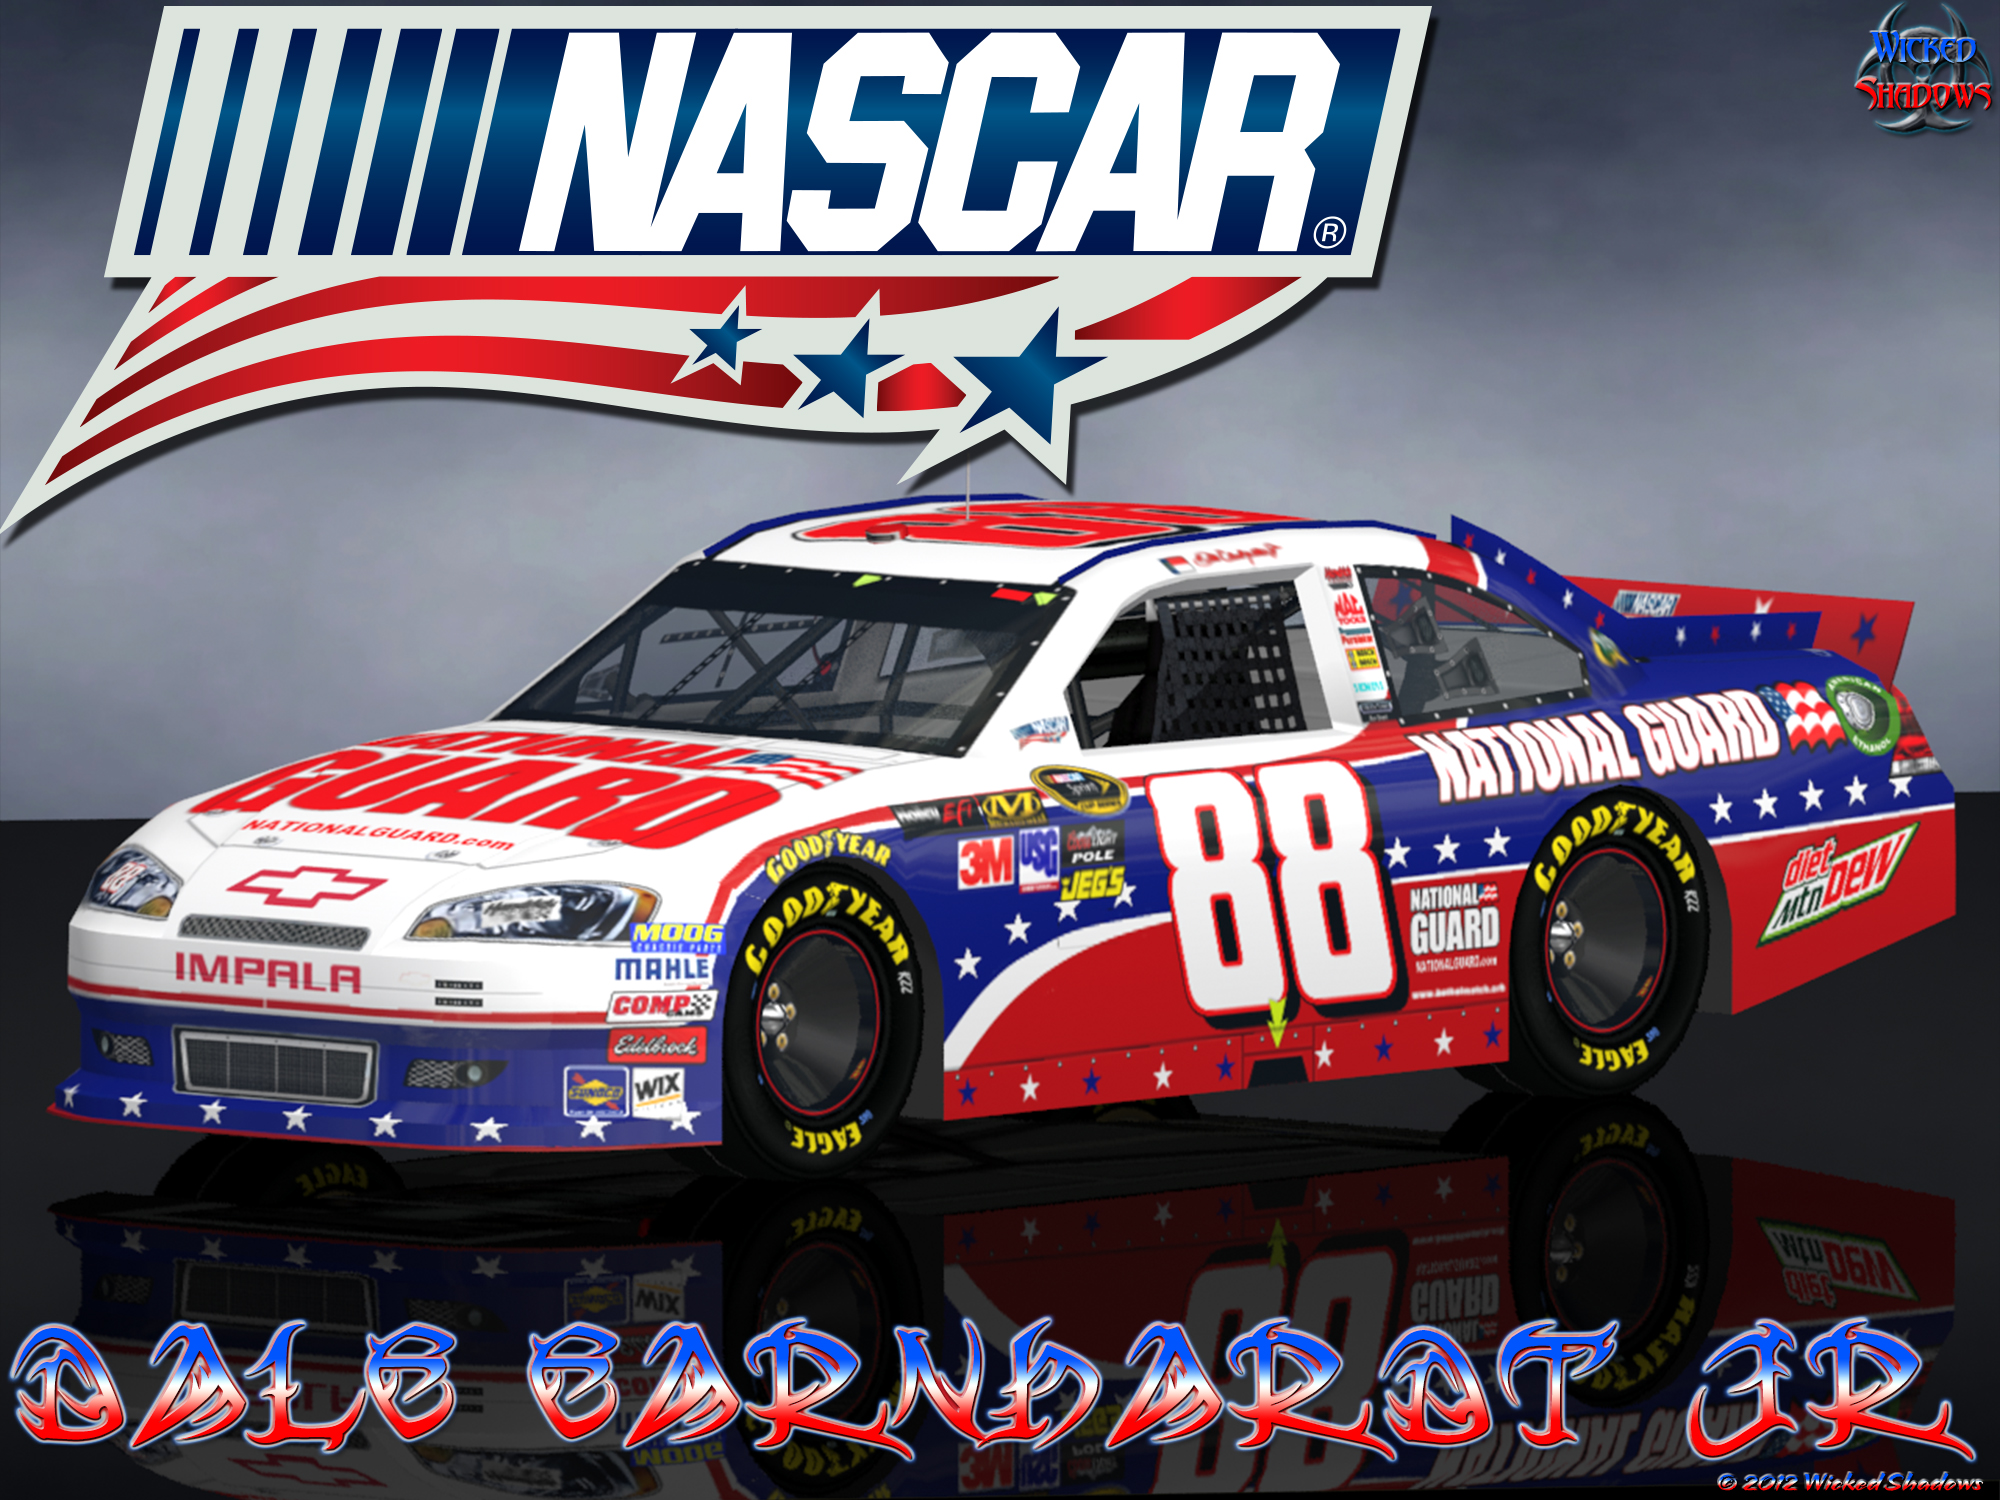 Wallpapers By Wicked Shadows: Dale Earnhardt Jr. Nascar Unites ...